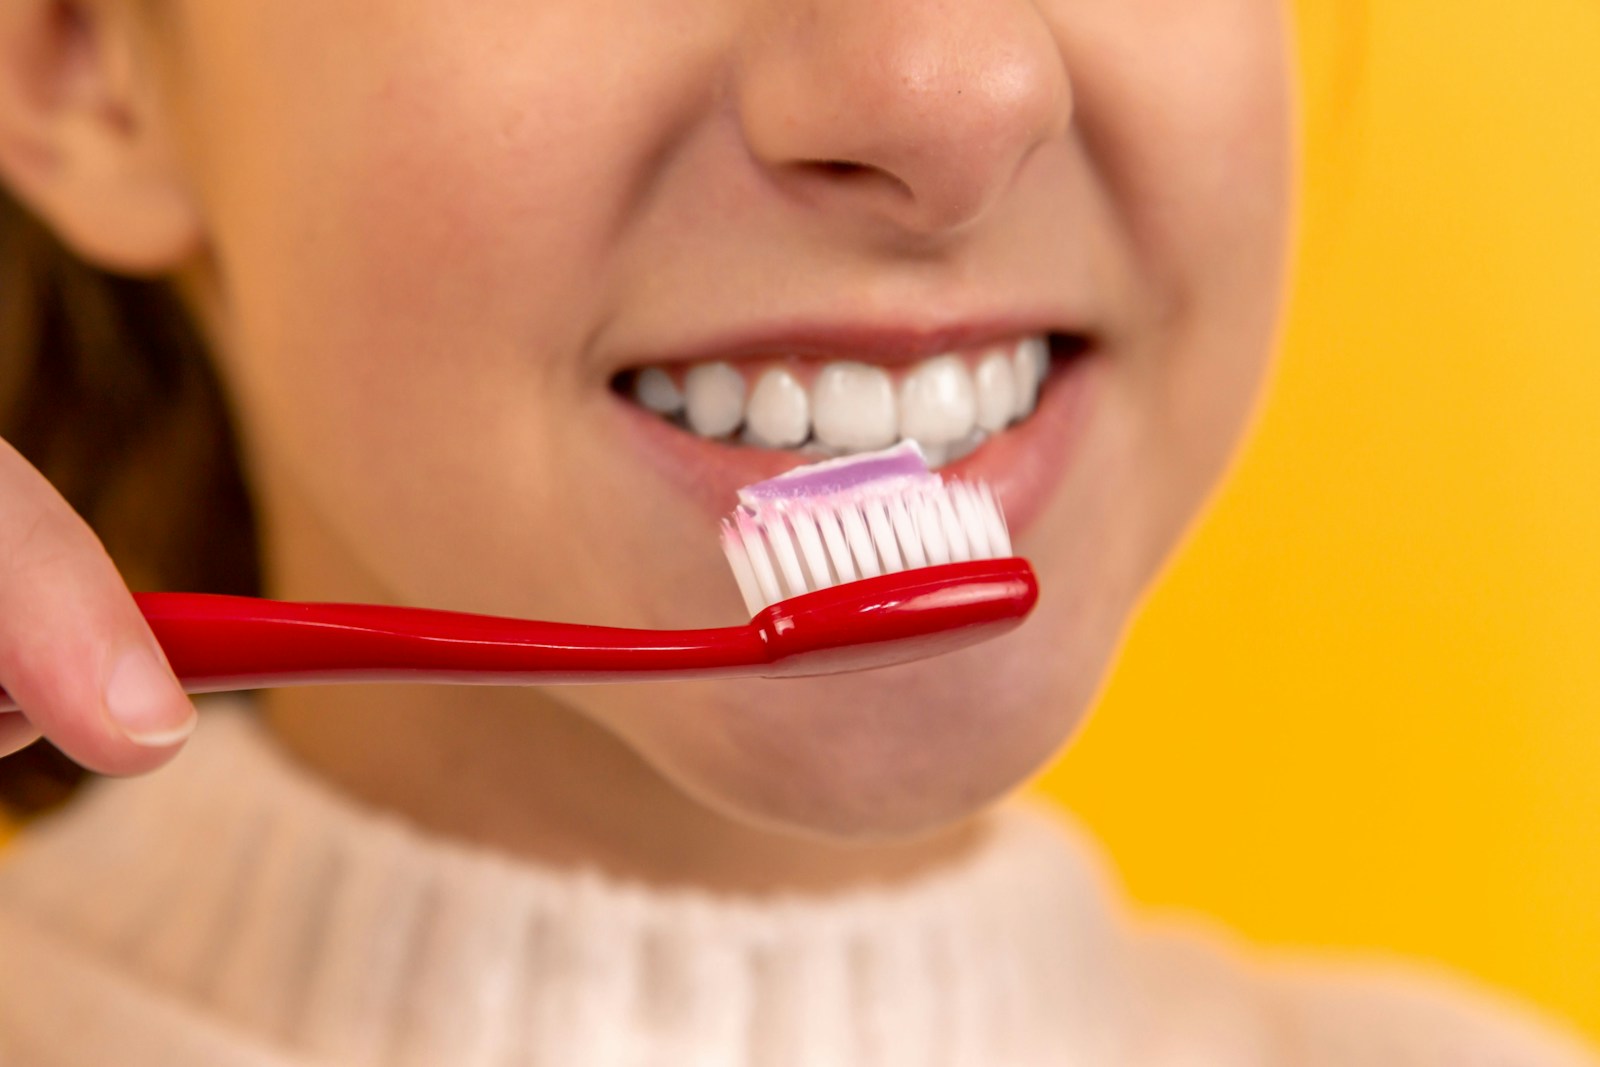 girl with red and white toothbrush in mouth with dental insurance